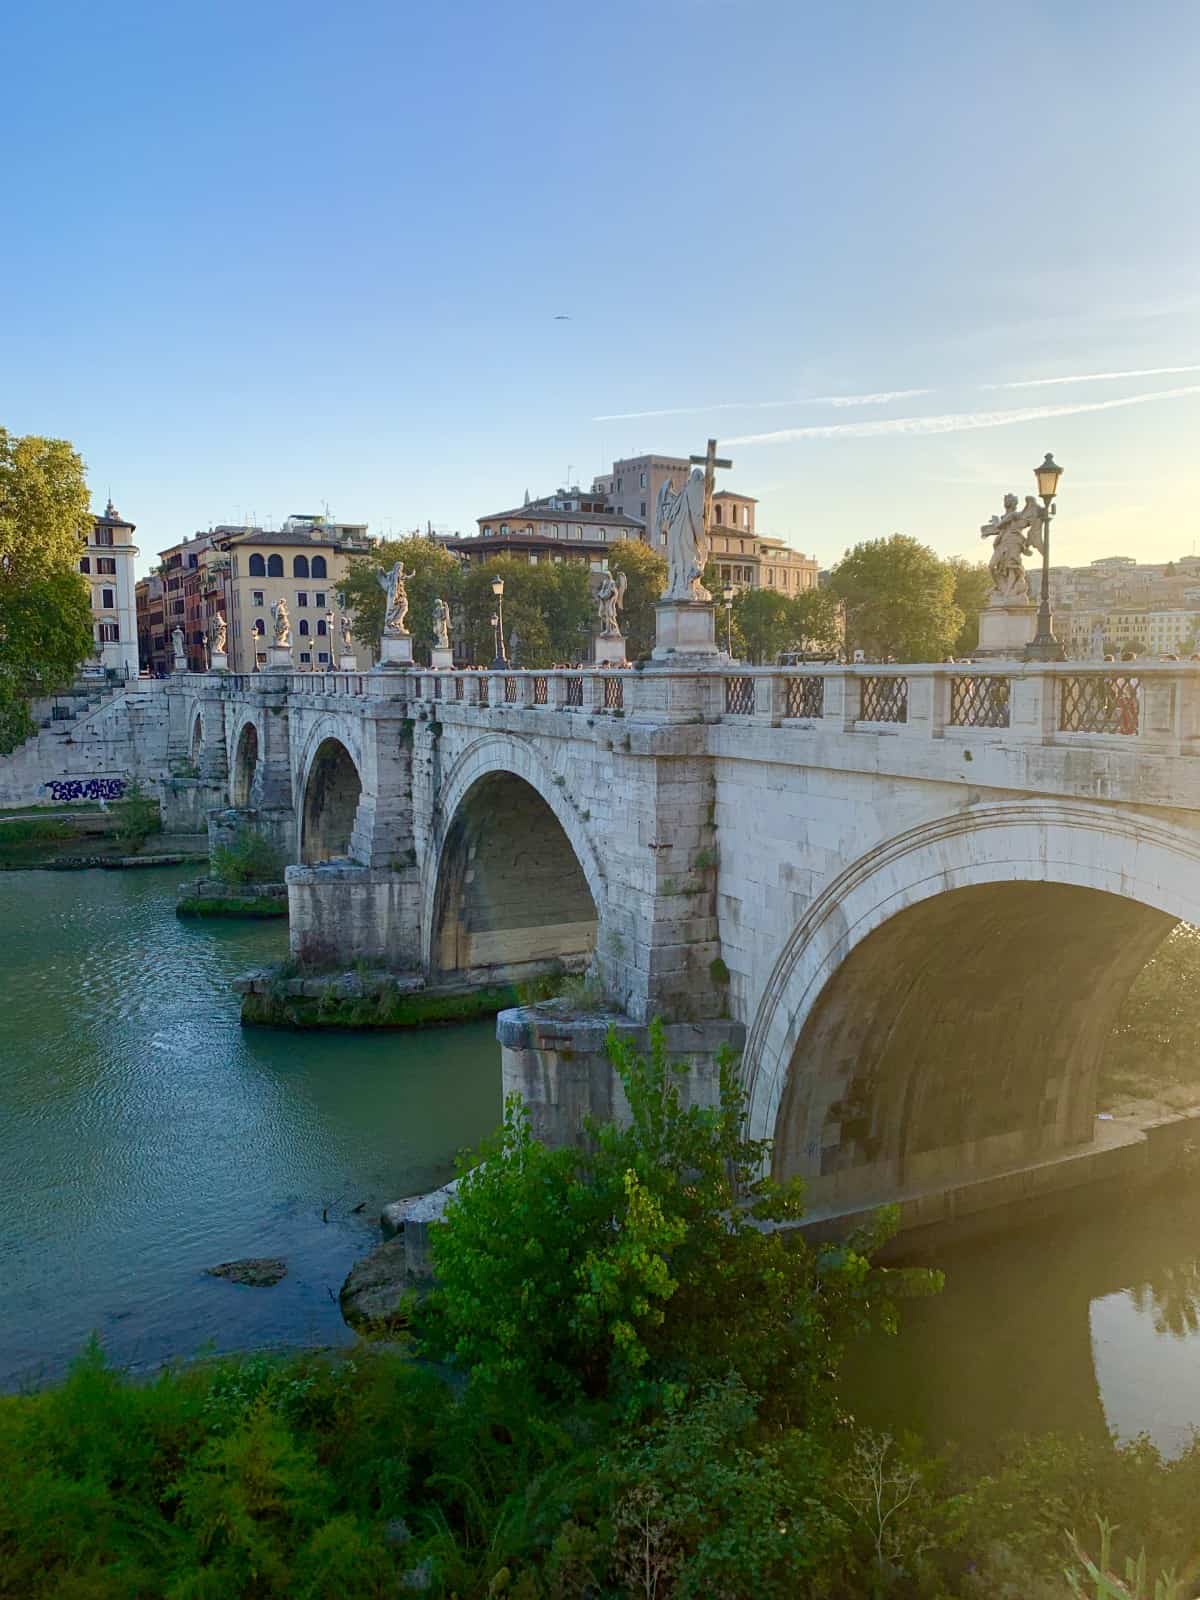 A First-Timer's Guide to Rome | A super detailed travel guide to the Eternal City, what to do in Rome whether you have one day or a week...things to do in Rome, what to see and what to skip, where to eat, sunset and sunrise Rome ideas, and more. Italy travel tips, Rome itinerary ideas, and Rome for solo travelers. Should you visit the Colosseum, Vatican Museum, Spanish Steps, & more! #rome #italy 